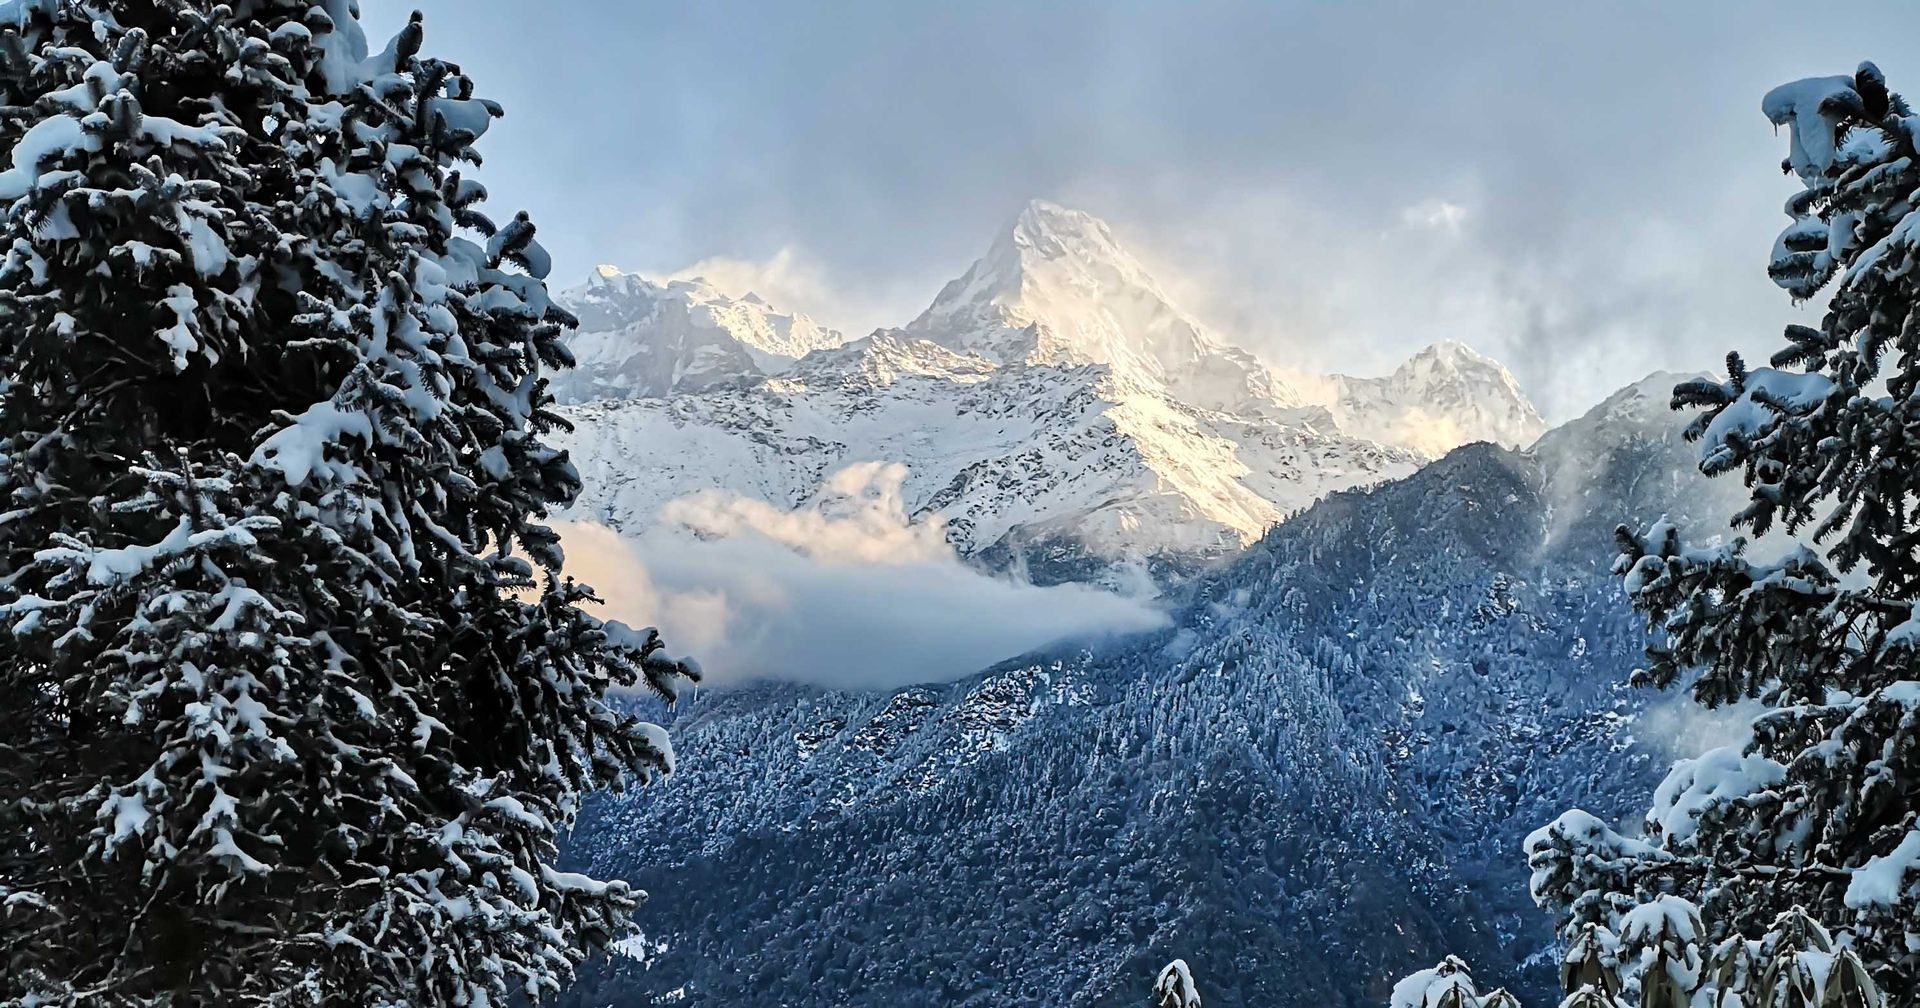  Poon Hill trail in Nepal during winter, showcasing the majestic snow-covered peaks 